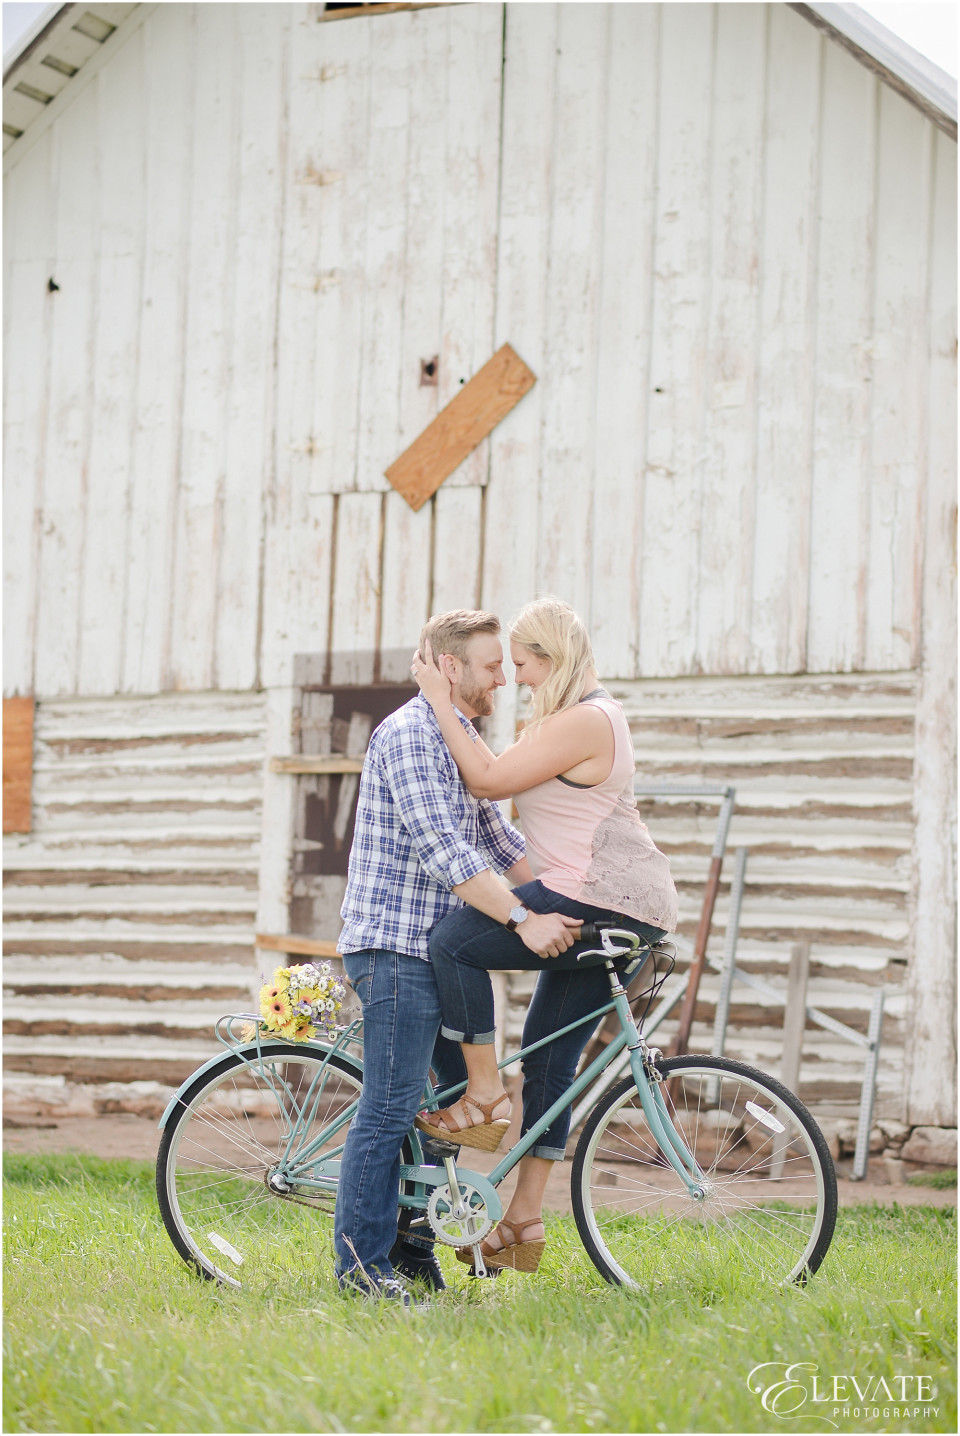 Vintage Themed Engagement Photos_0007